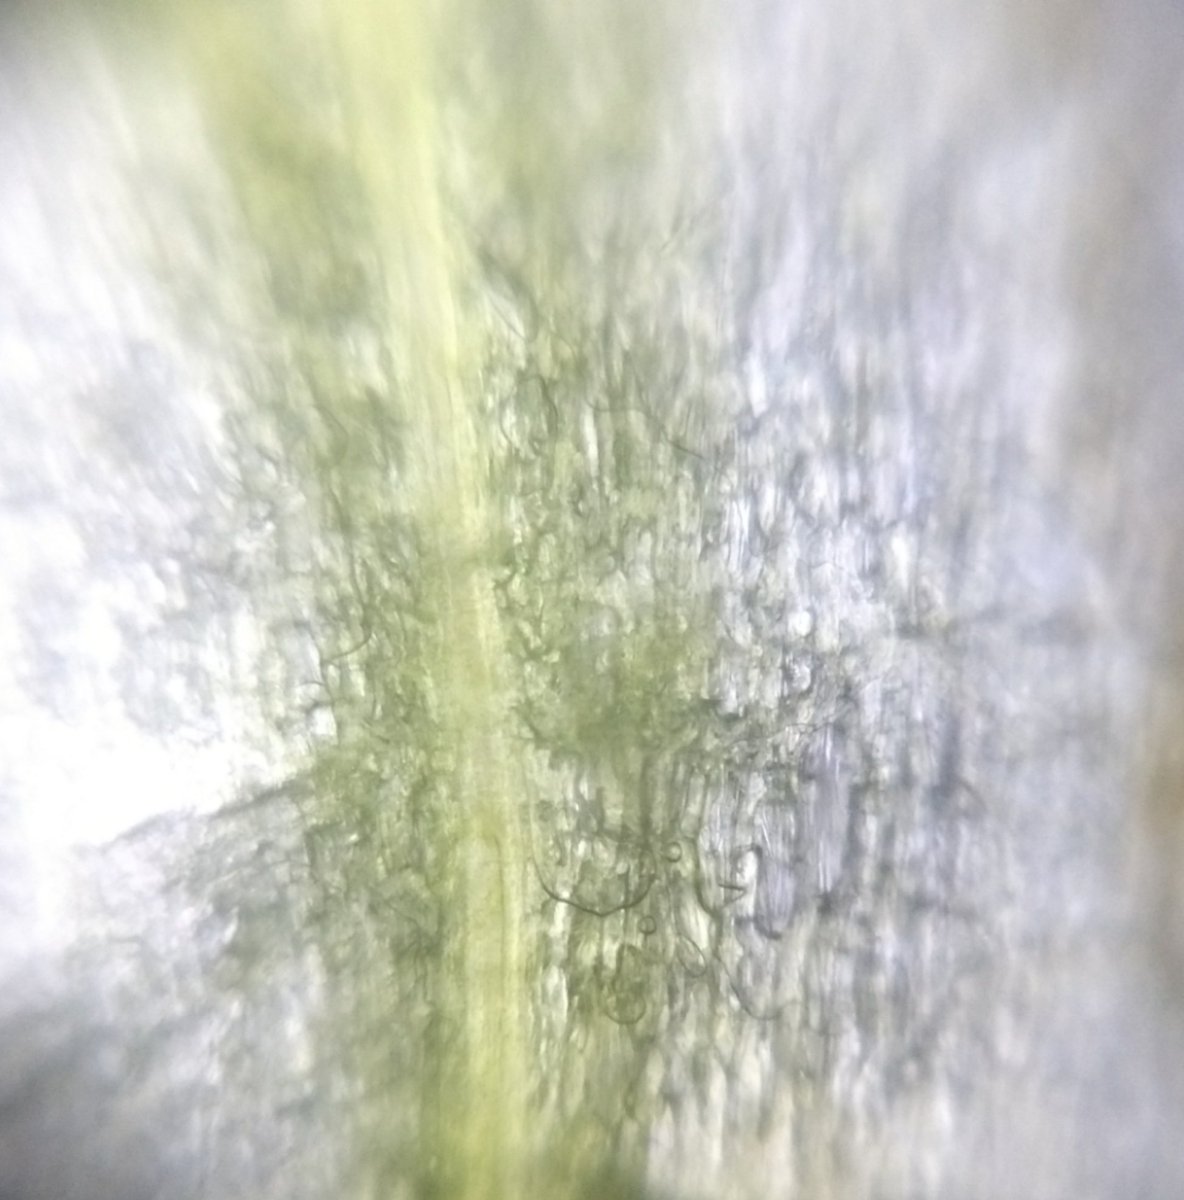  image of stamen and second is the inner layering of sepals